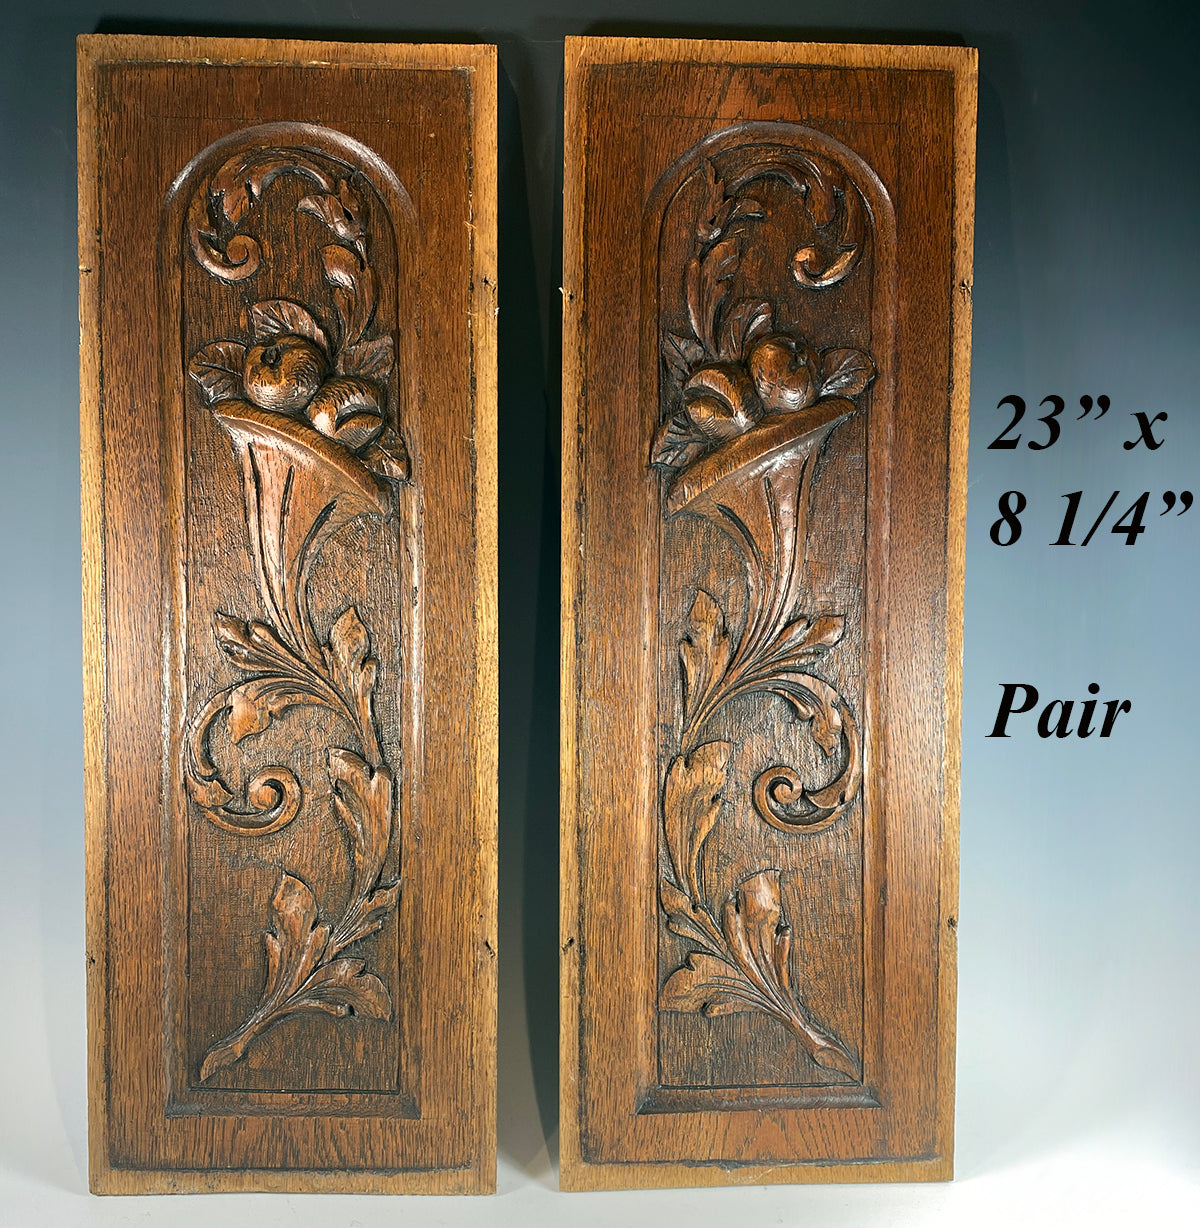 Pair (2) of Antique French Hand Carved Neoclassical Wood Panels, Cabinet Doors, Insets